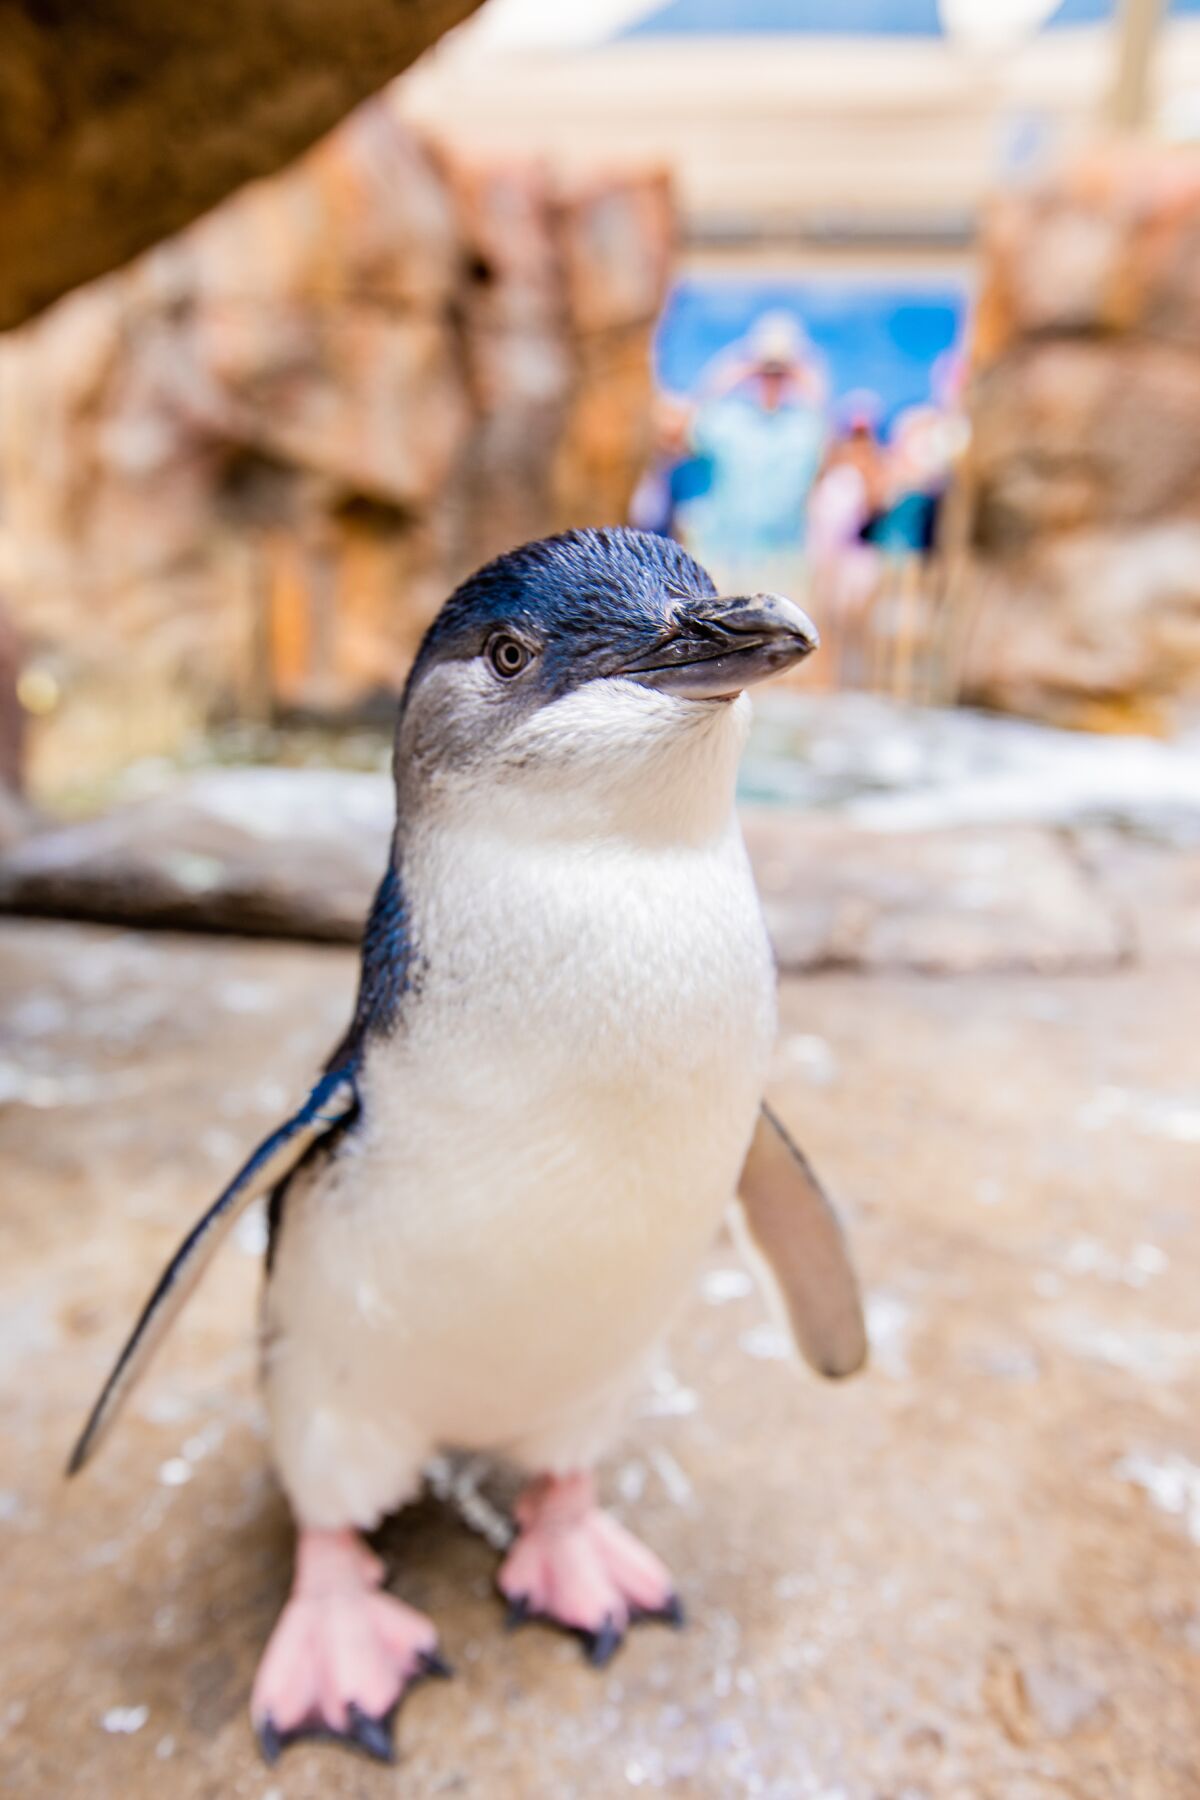 Magic, a little blue penguin who lived in a new exhibit at Birch Aquarium, died last week after a fungal infection.